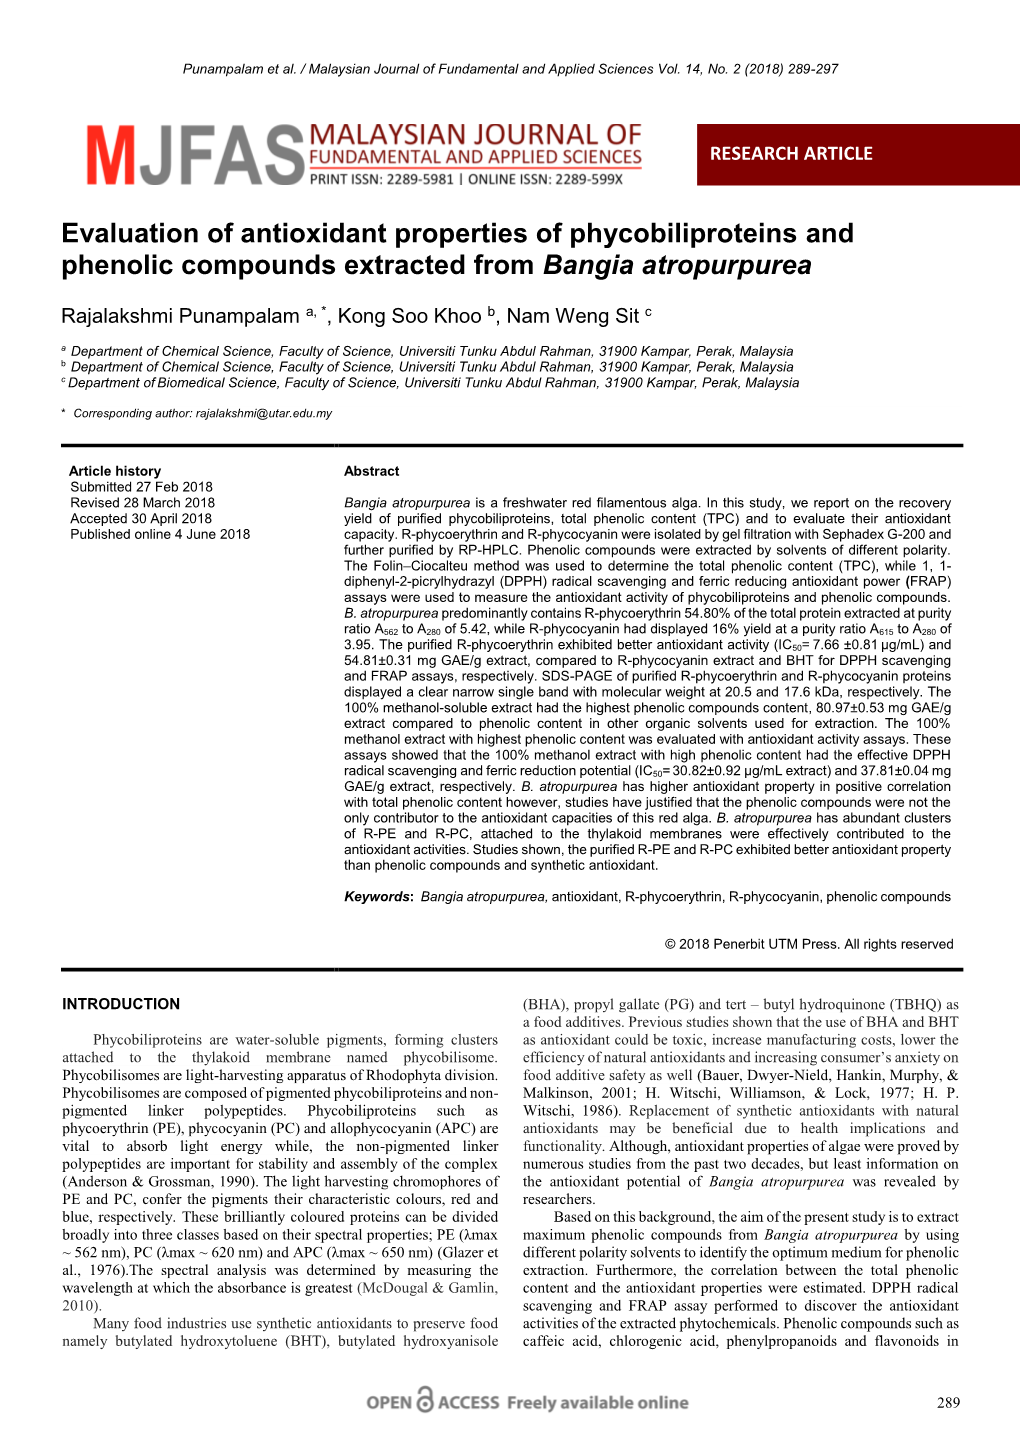 Evaluation of Antioxidant Properties of Phycobiliproteins and Phenolic Compounds Extracted from Bangia Atropurpurea